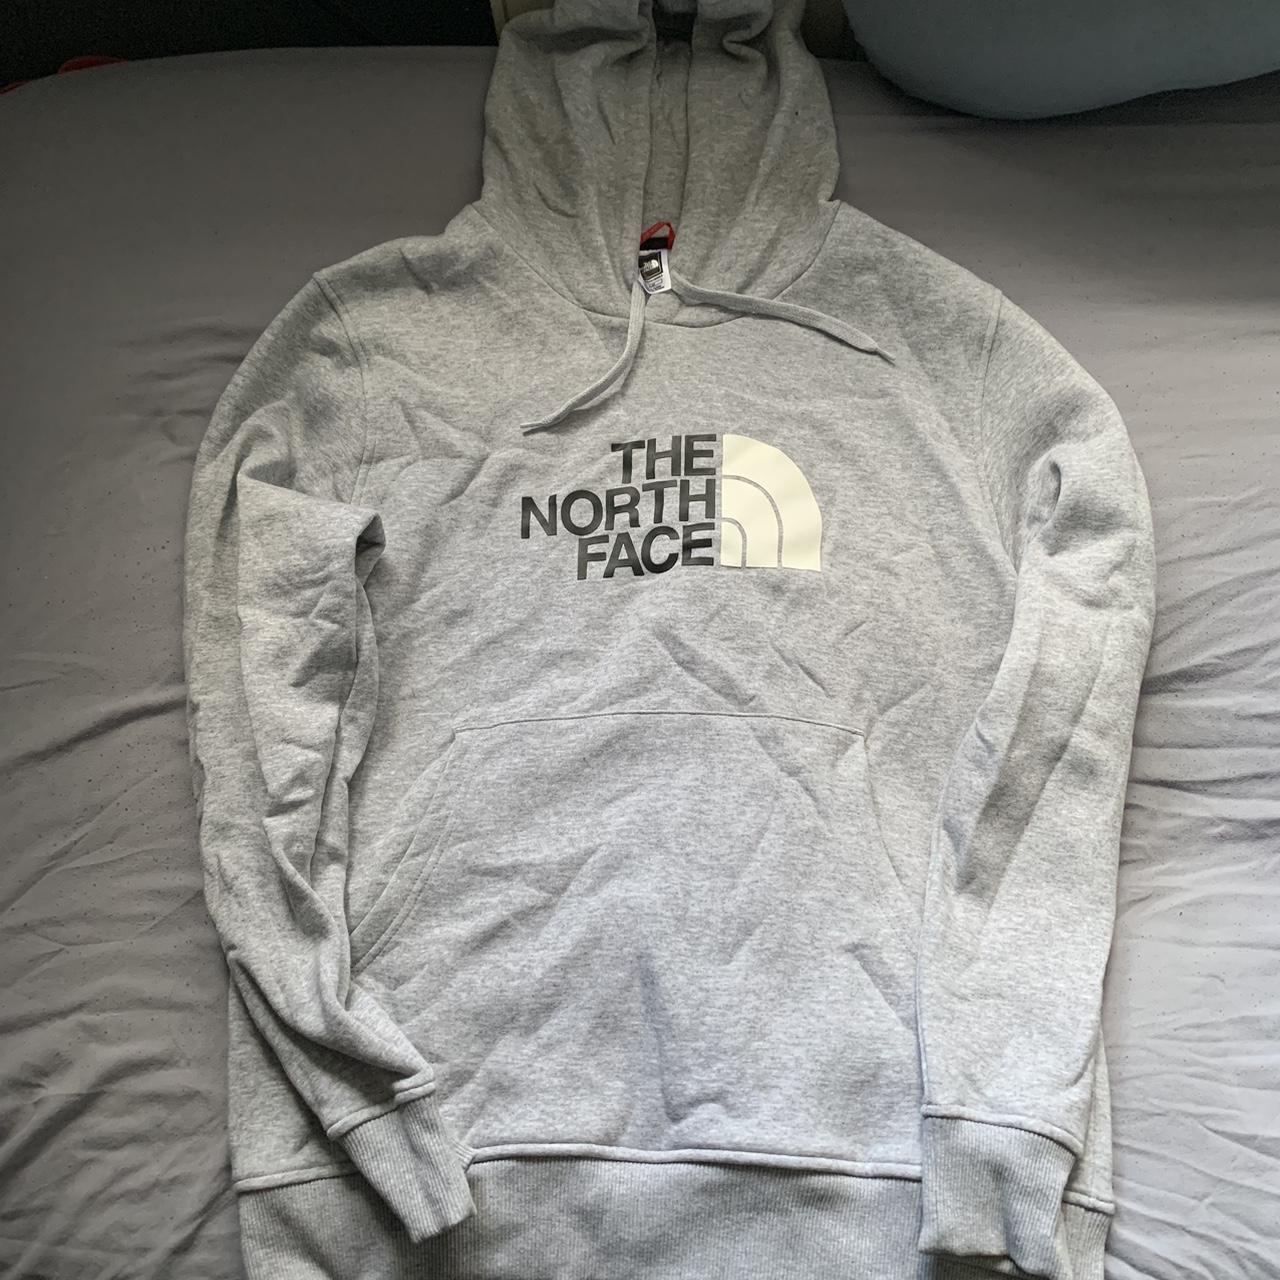 The North Face Hoodie 🔥 Great condition, just... - Depop